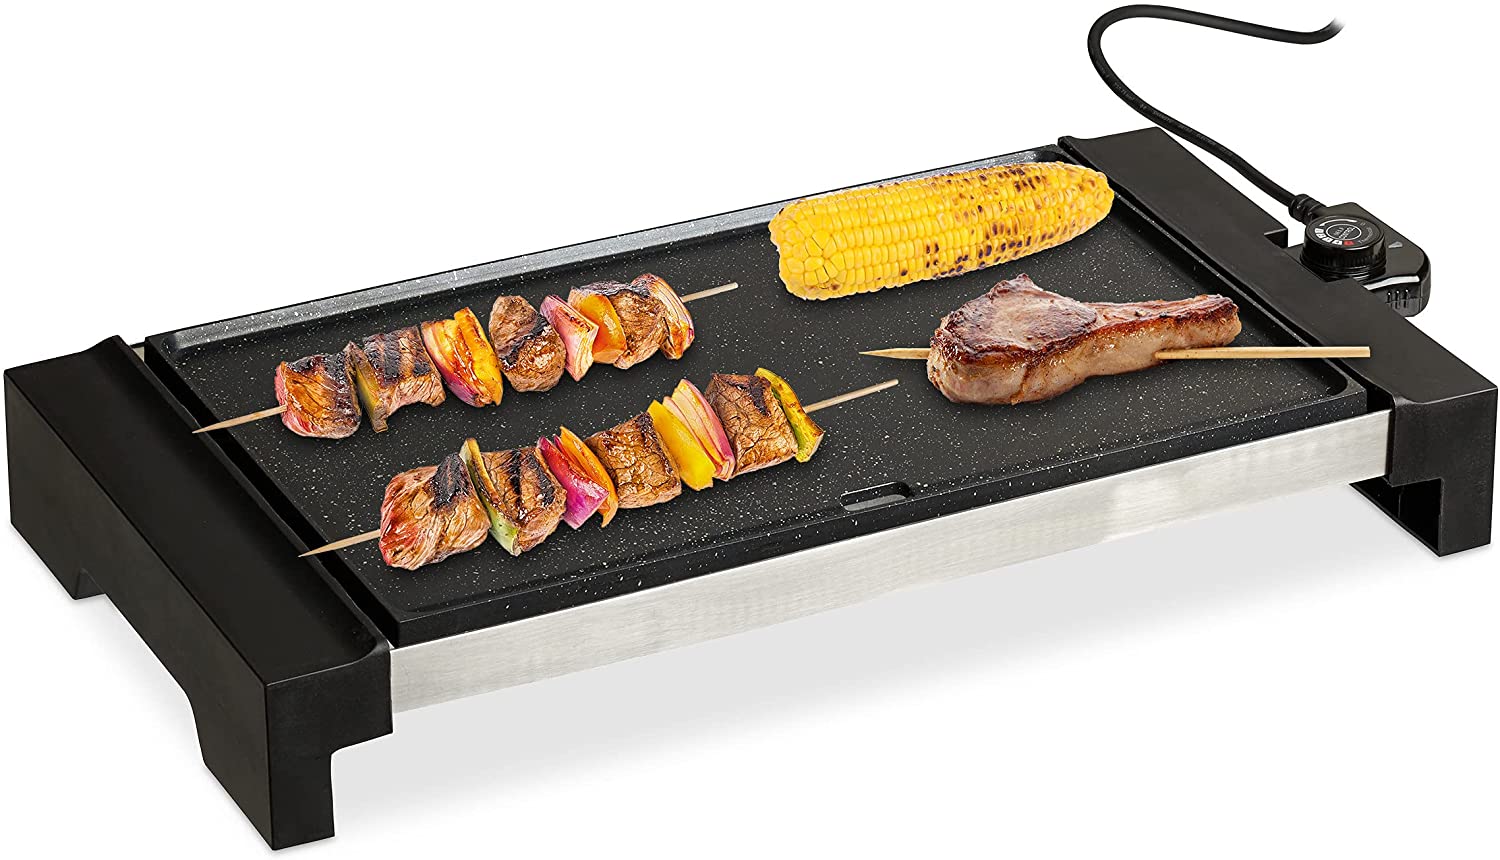 Relaxdays Electric Table Grill with Temperature Control, BBQ Electric Grill, 1500 W, Large Grill Area 42 x 27 cm, Black